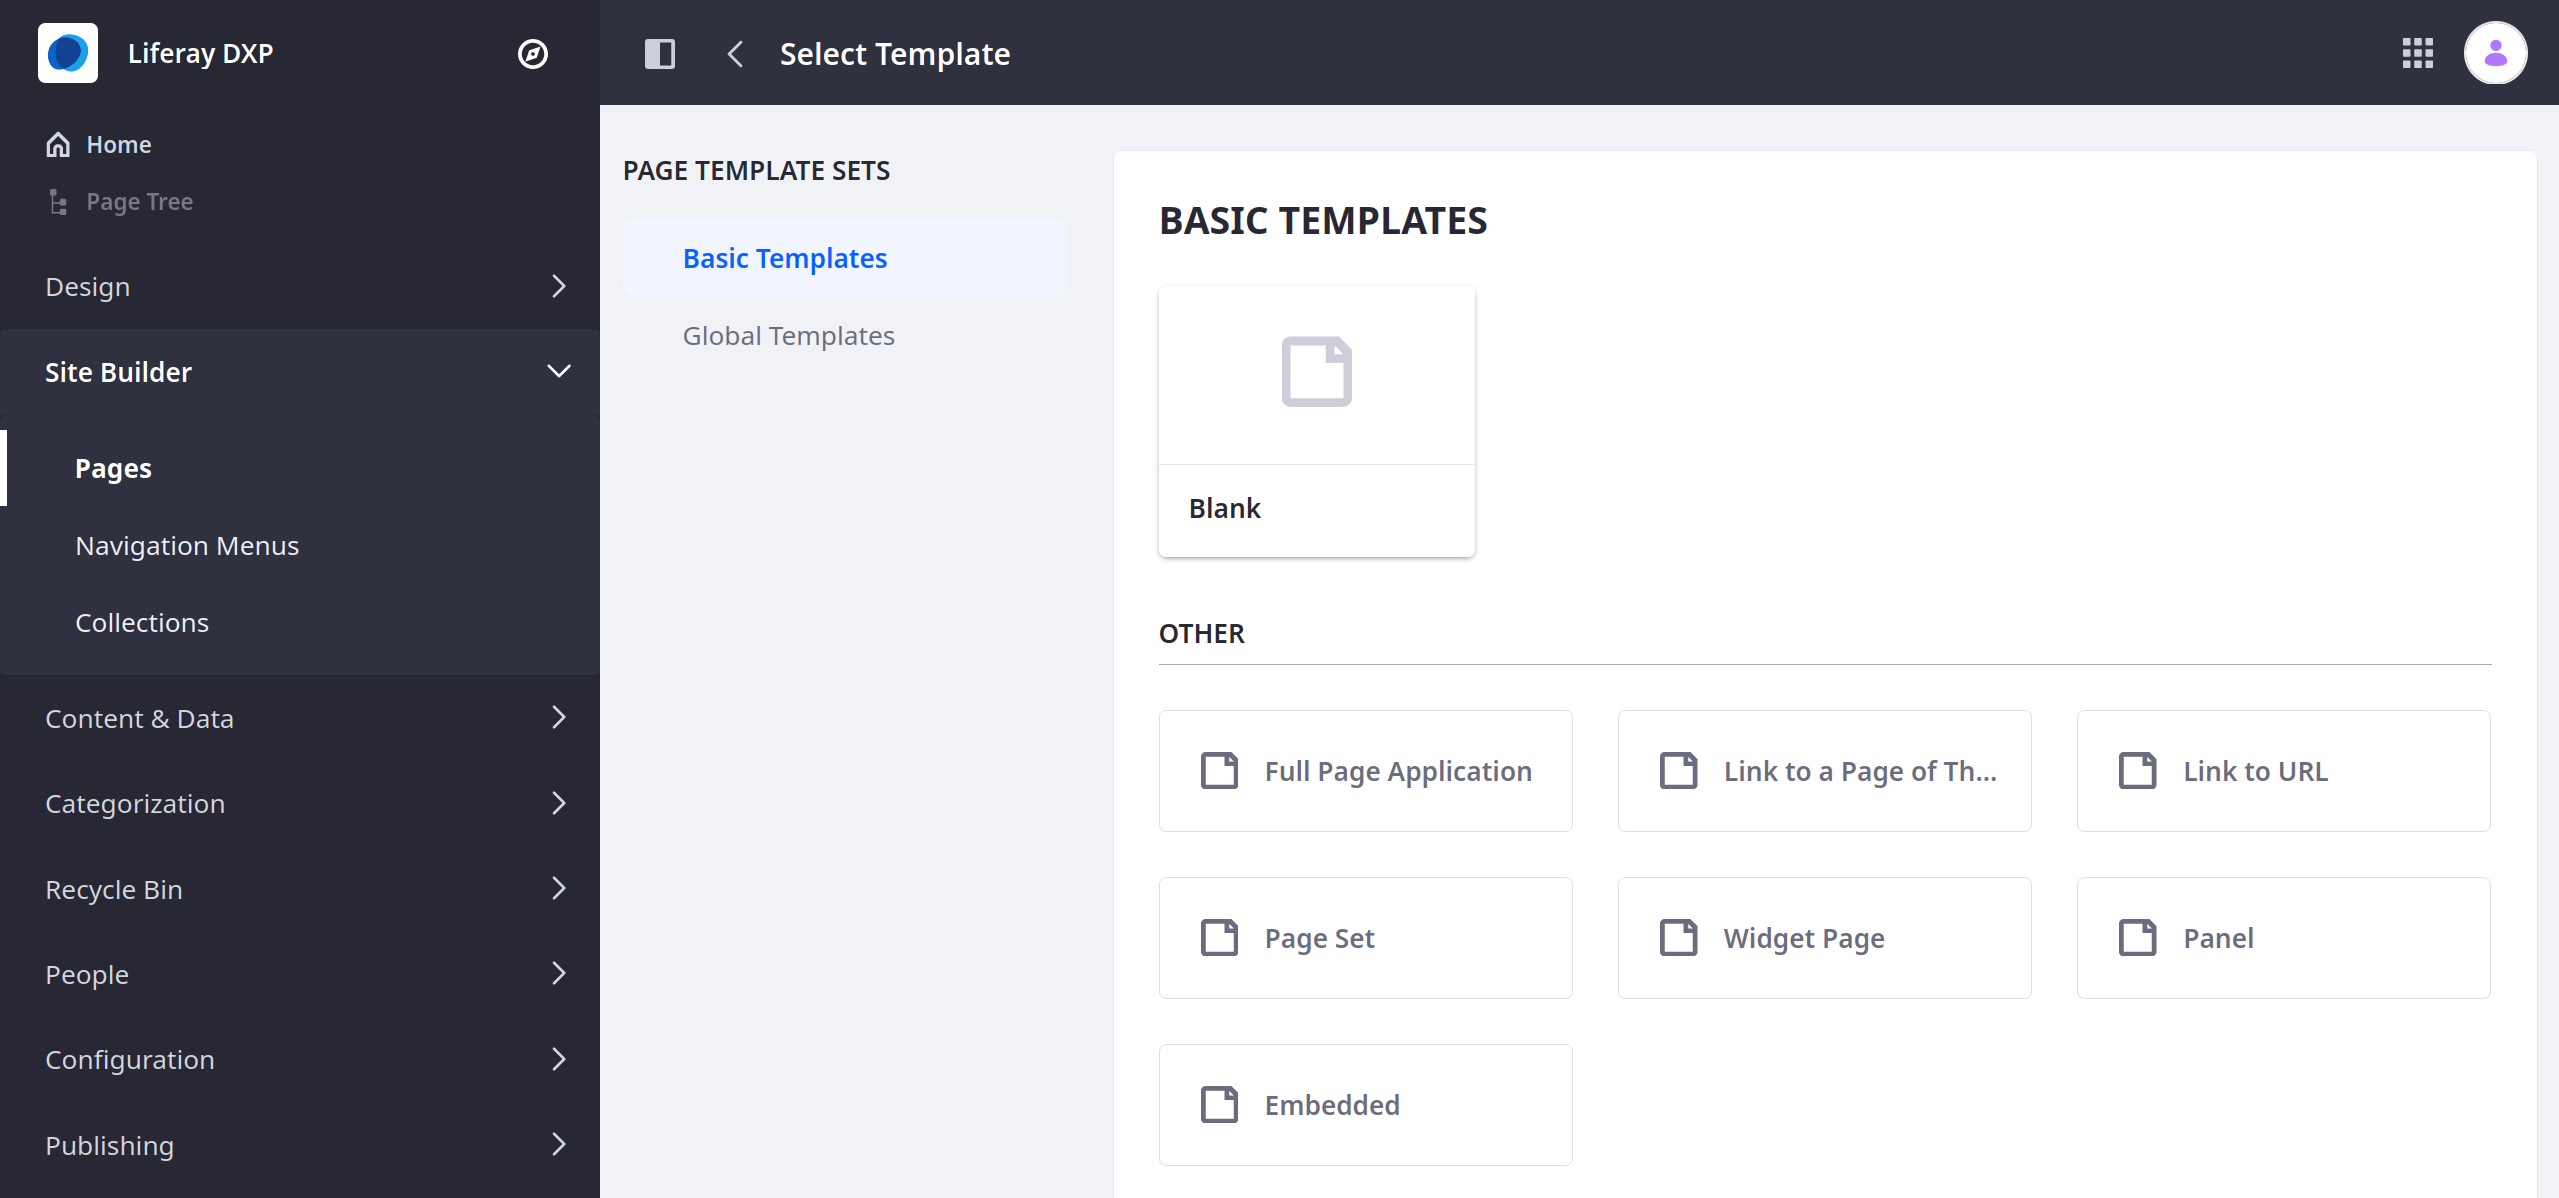 Select a Basic or Global Template for your Page.